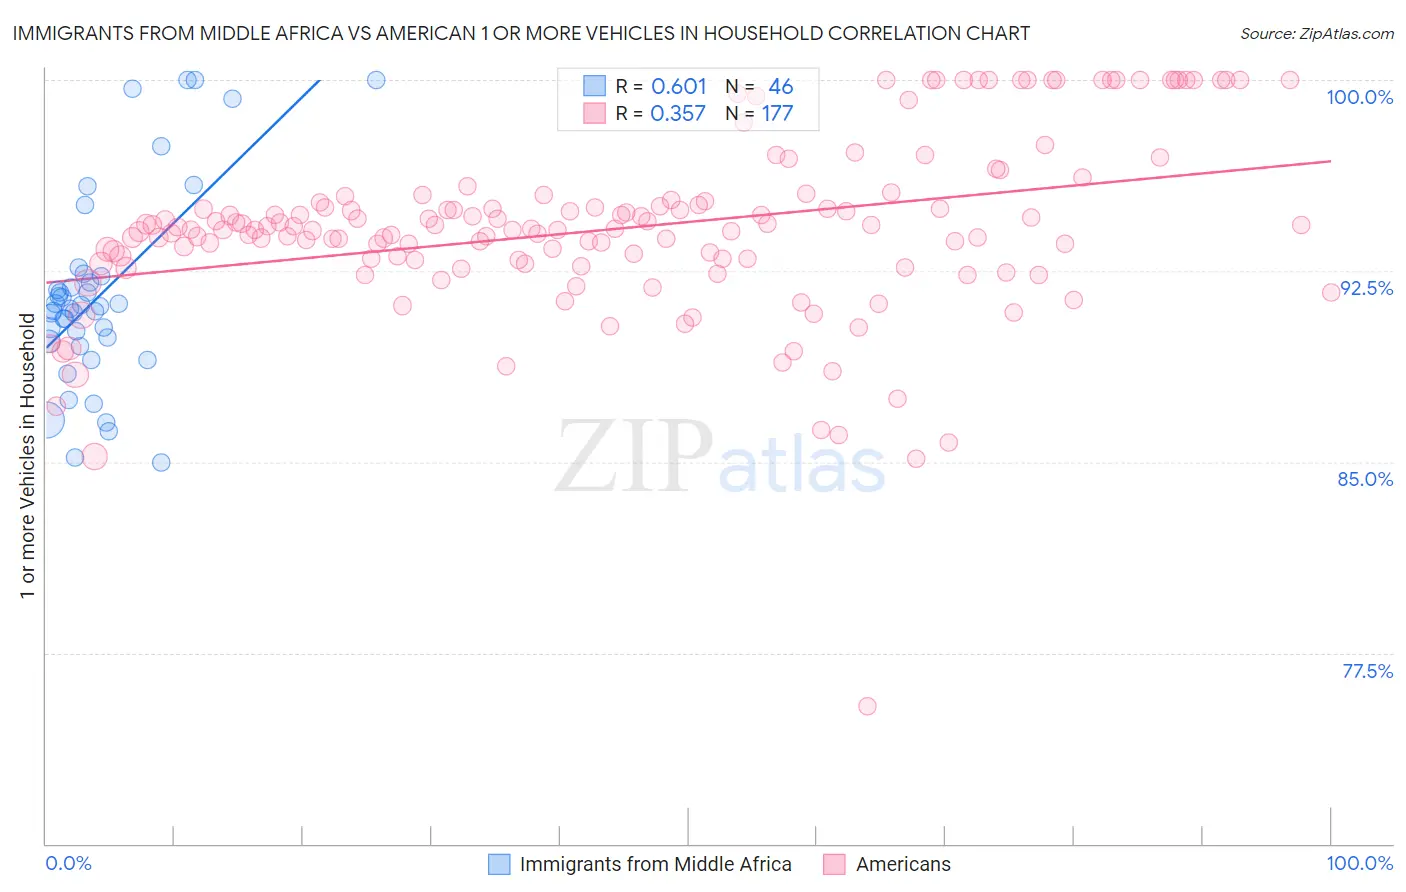 Immigrants from Middle Africa vs American 1 or more Vehicles in Household